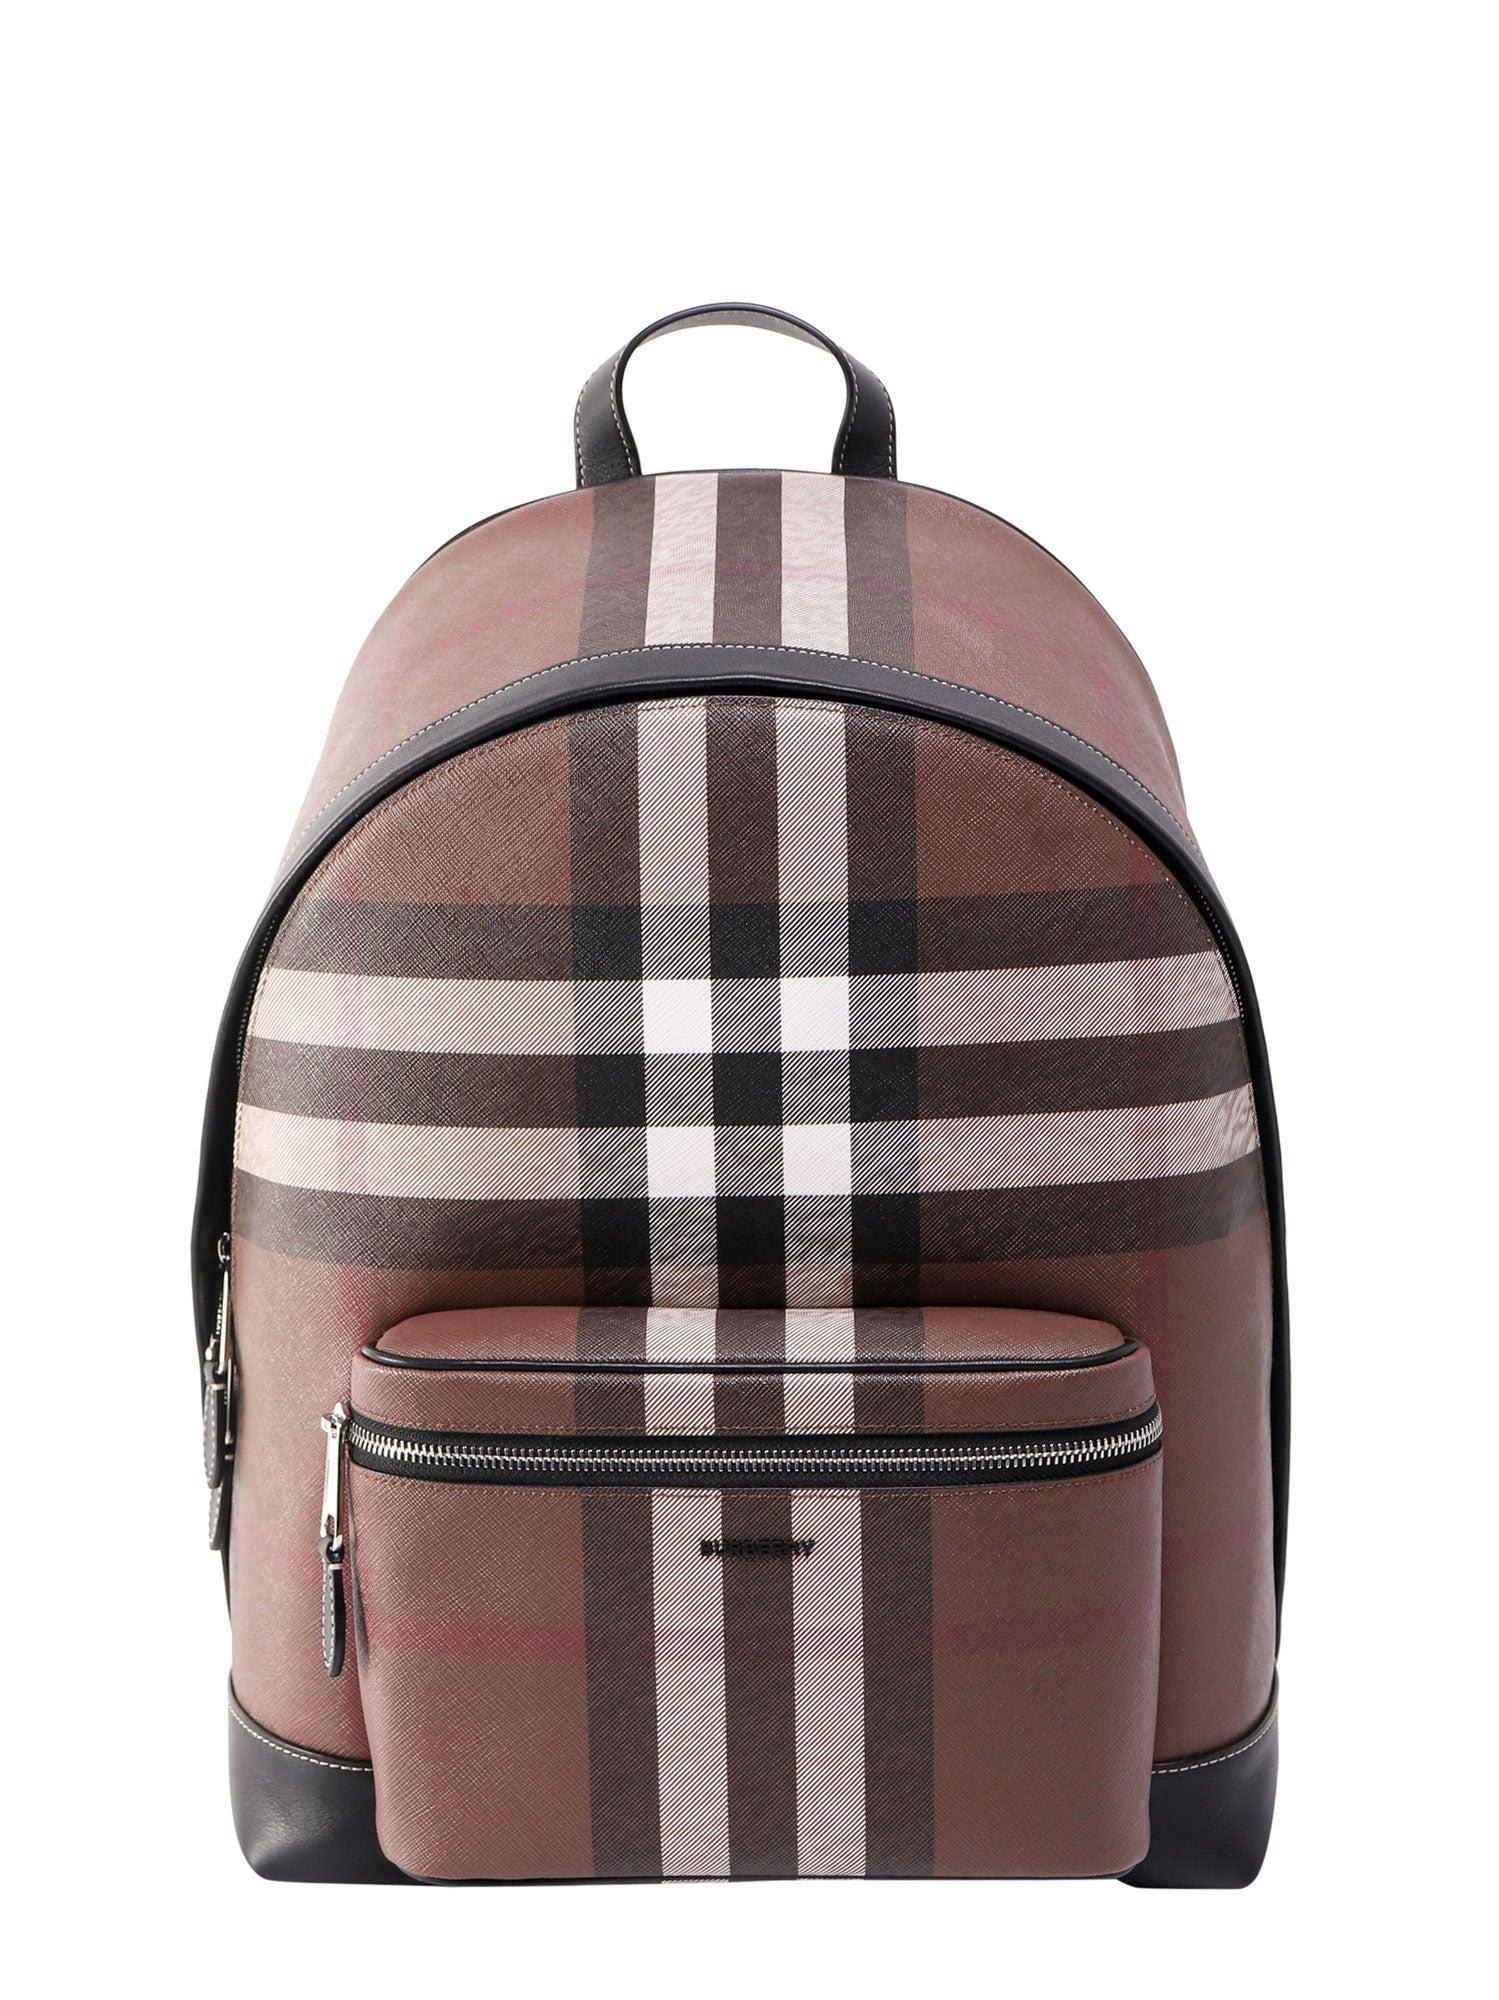 BURBERRY CHECK PATTERNED BACKPACK